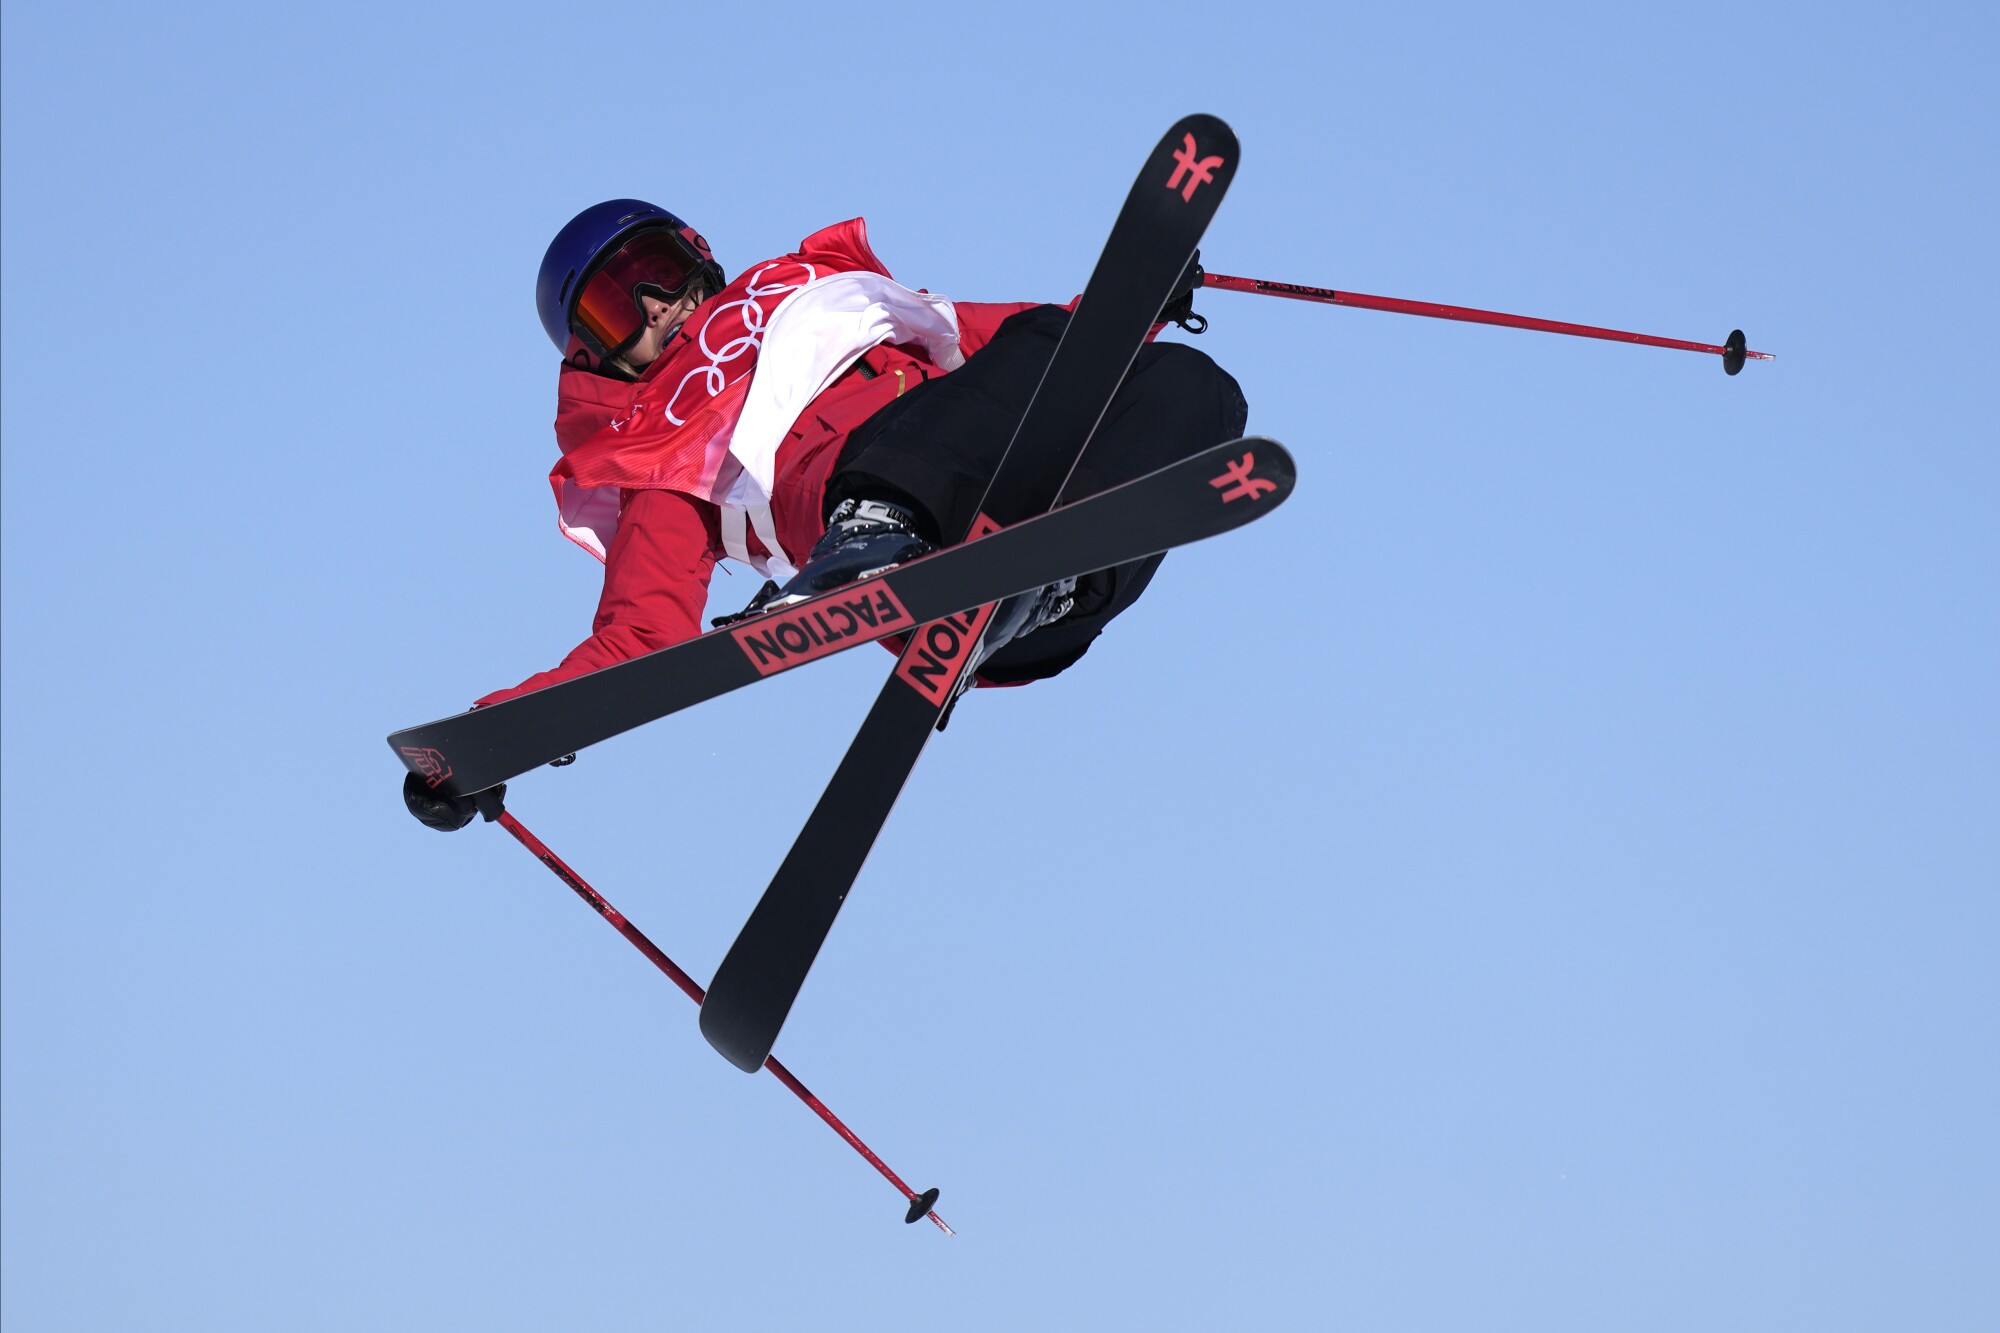 China's Eileen Gu competes during the women's slopestyle qualification at the 2022 Winter Olympics